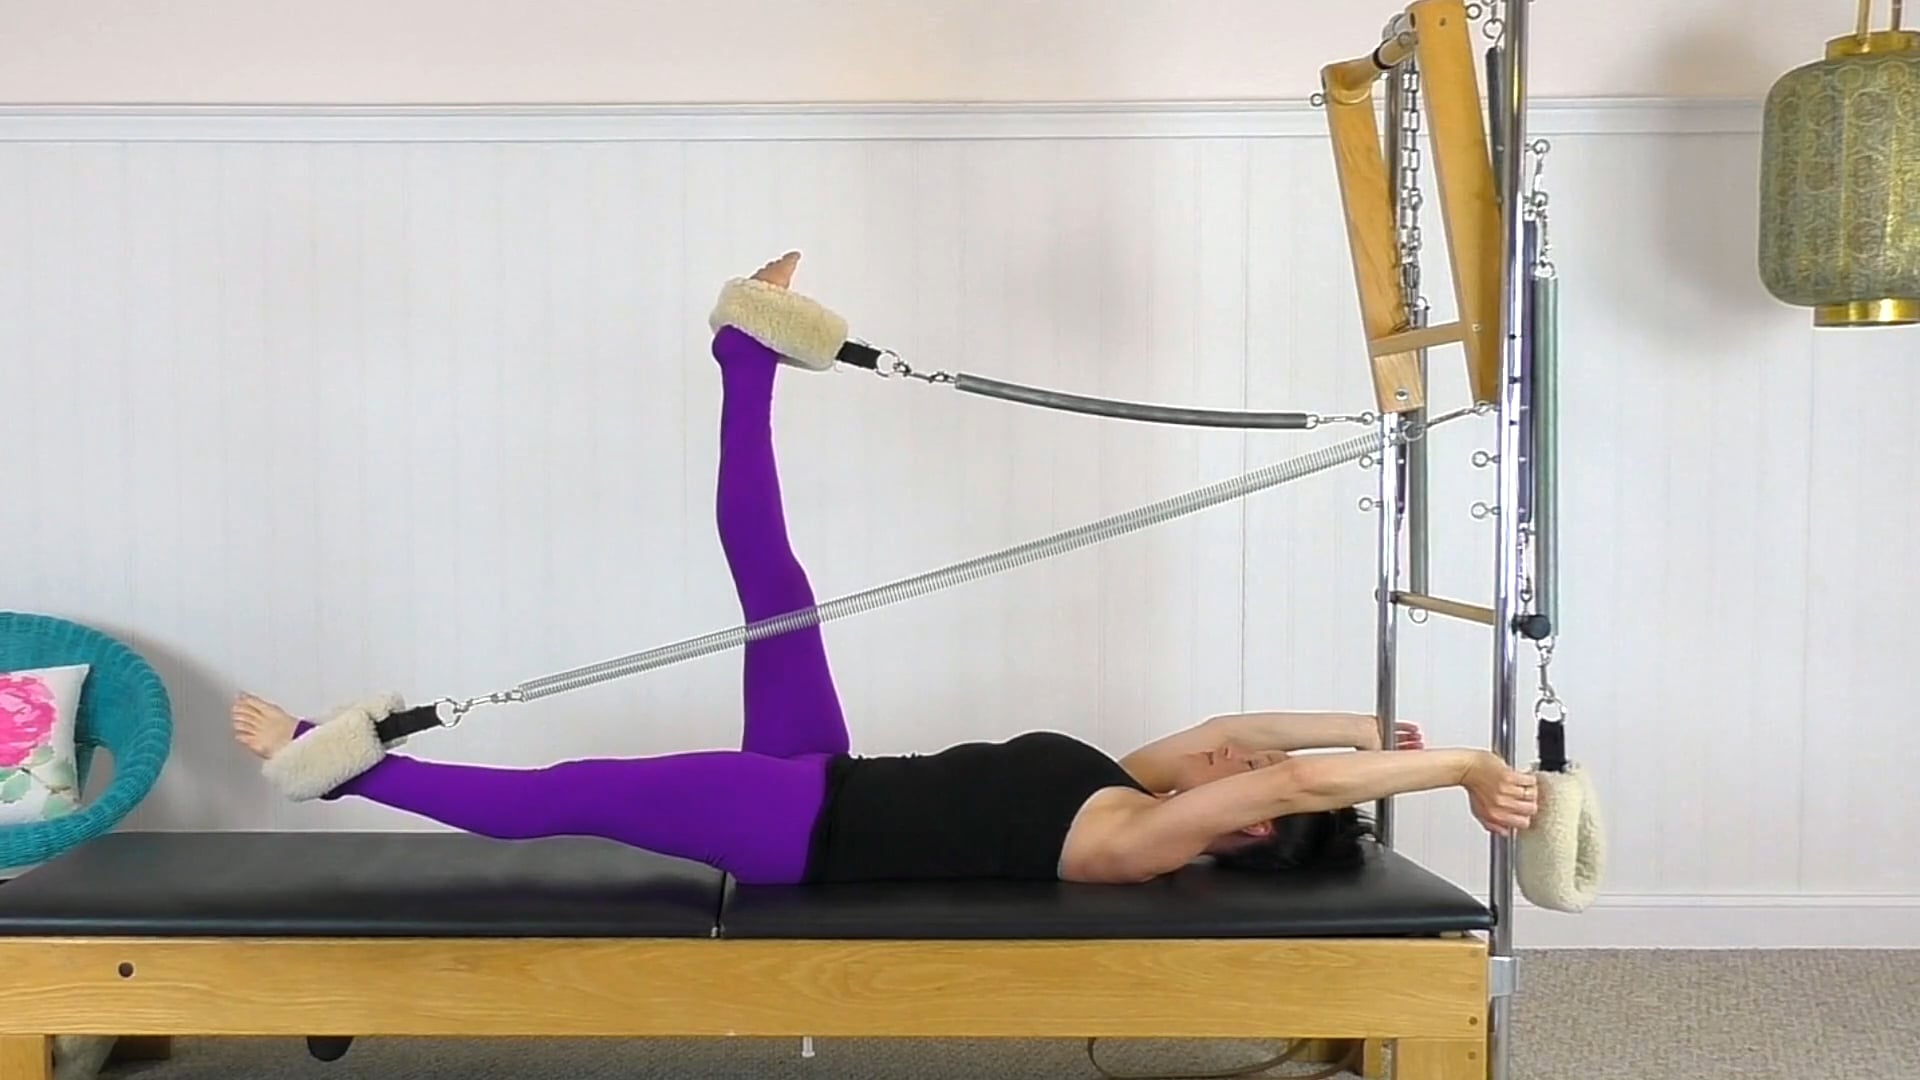 Sequencing For Success:  Arm and Leg Springs (18 mins) 